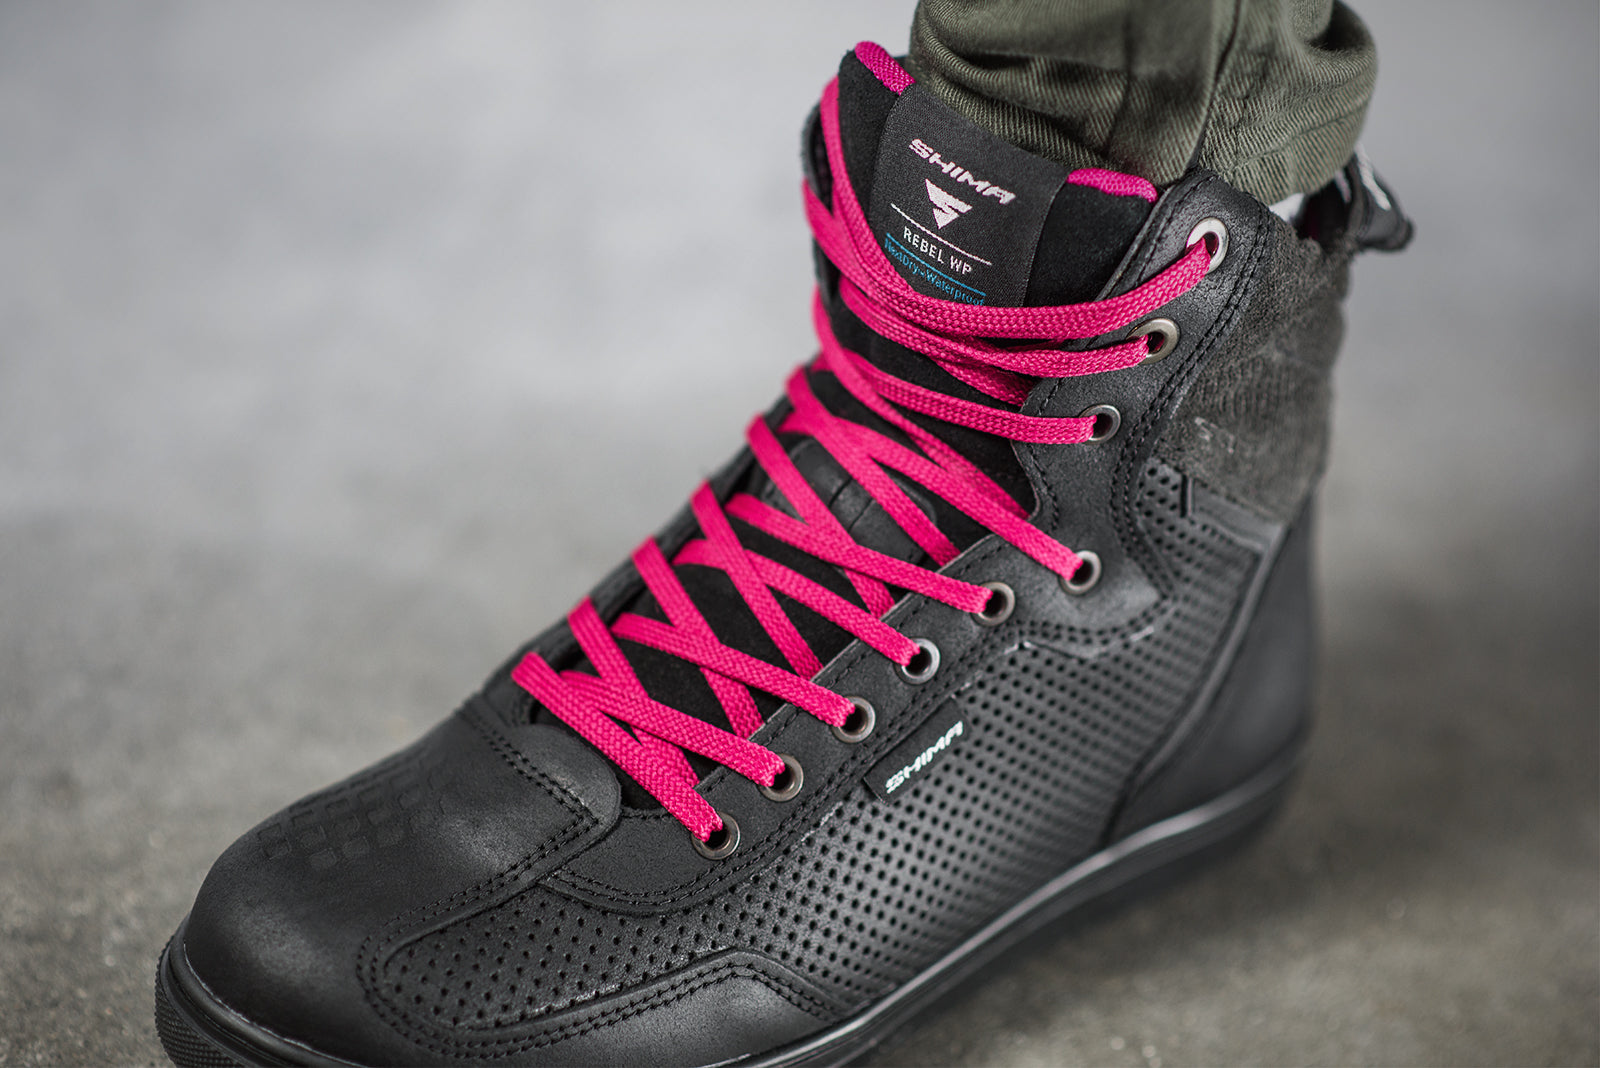 Rebel waterproof motorcycle sneaker with pink laces from Shima 